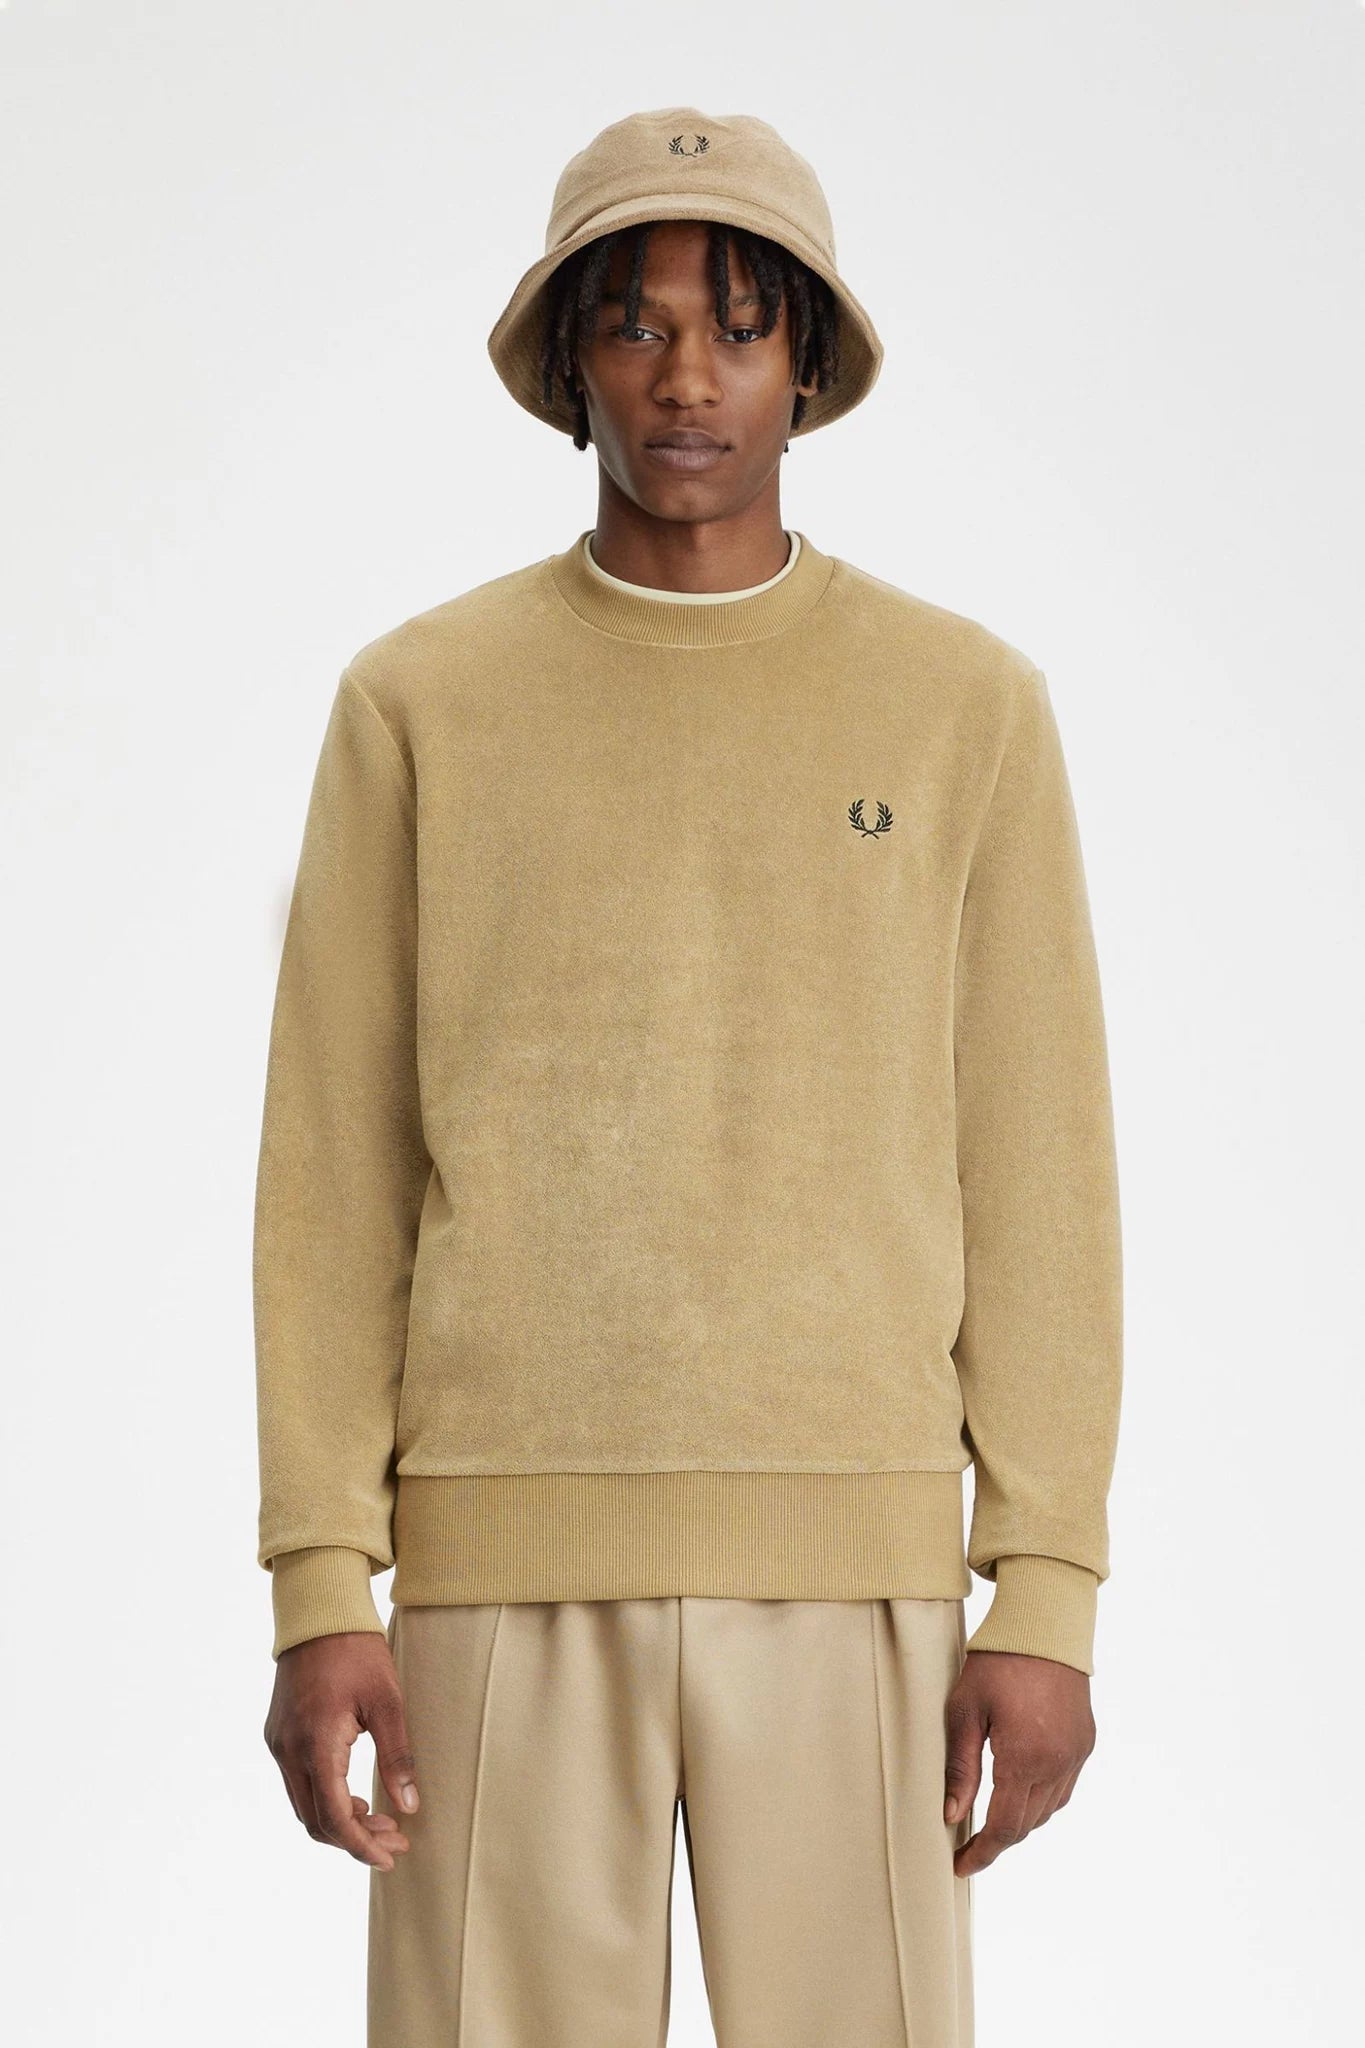 Towelling Crew Neck Sweatshirt Sweaters & Knits Fred Perry   